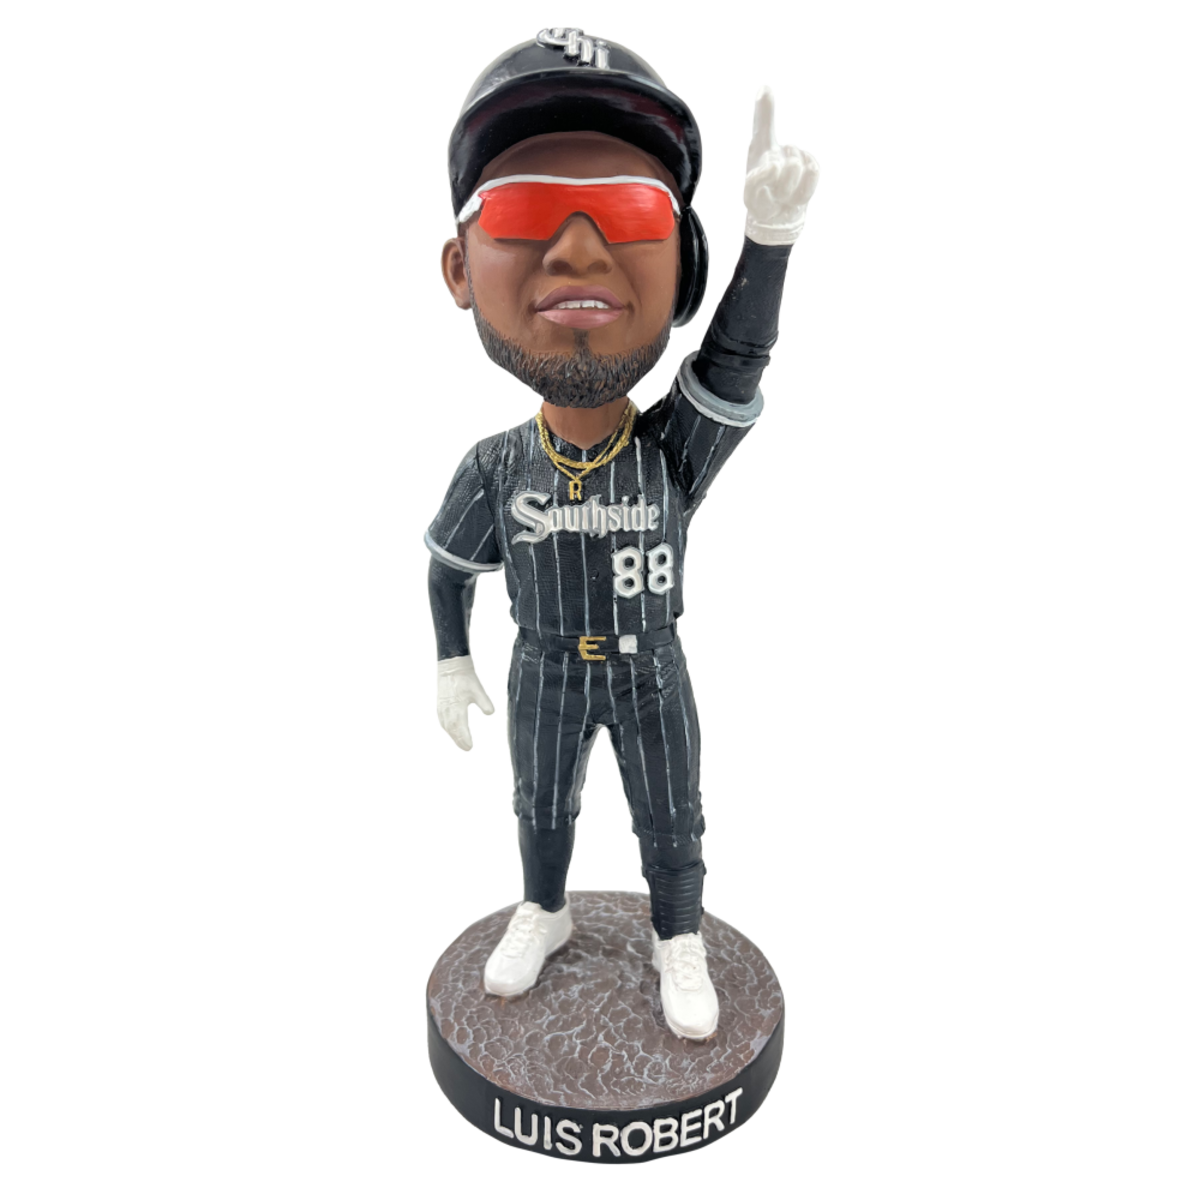 The Chicago White Sox Luis Robert bobblehead giveaway for Saturday, July 8, 2023 vs. the St. Louis Cardinals